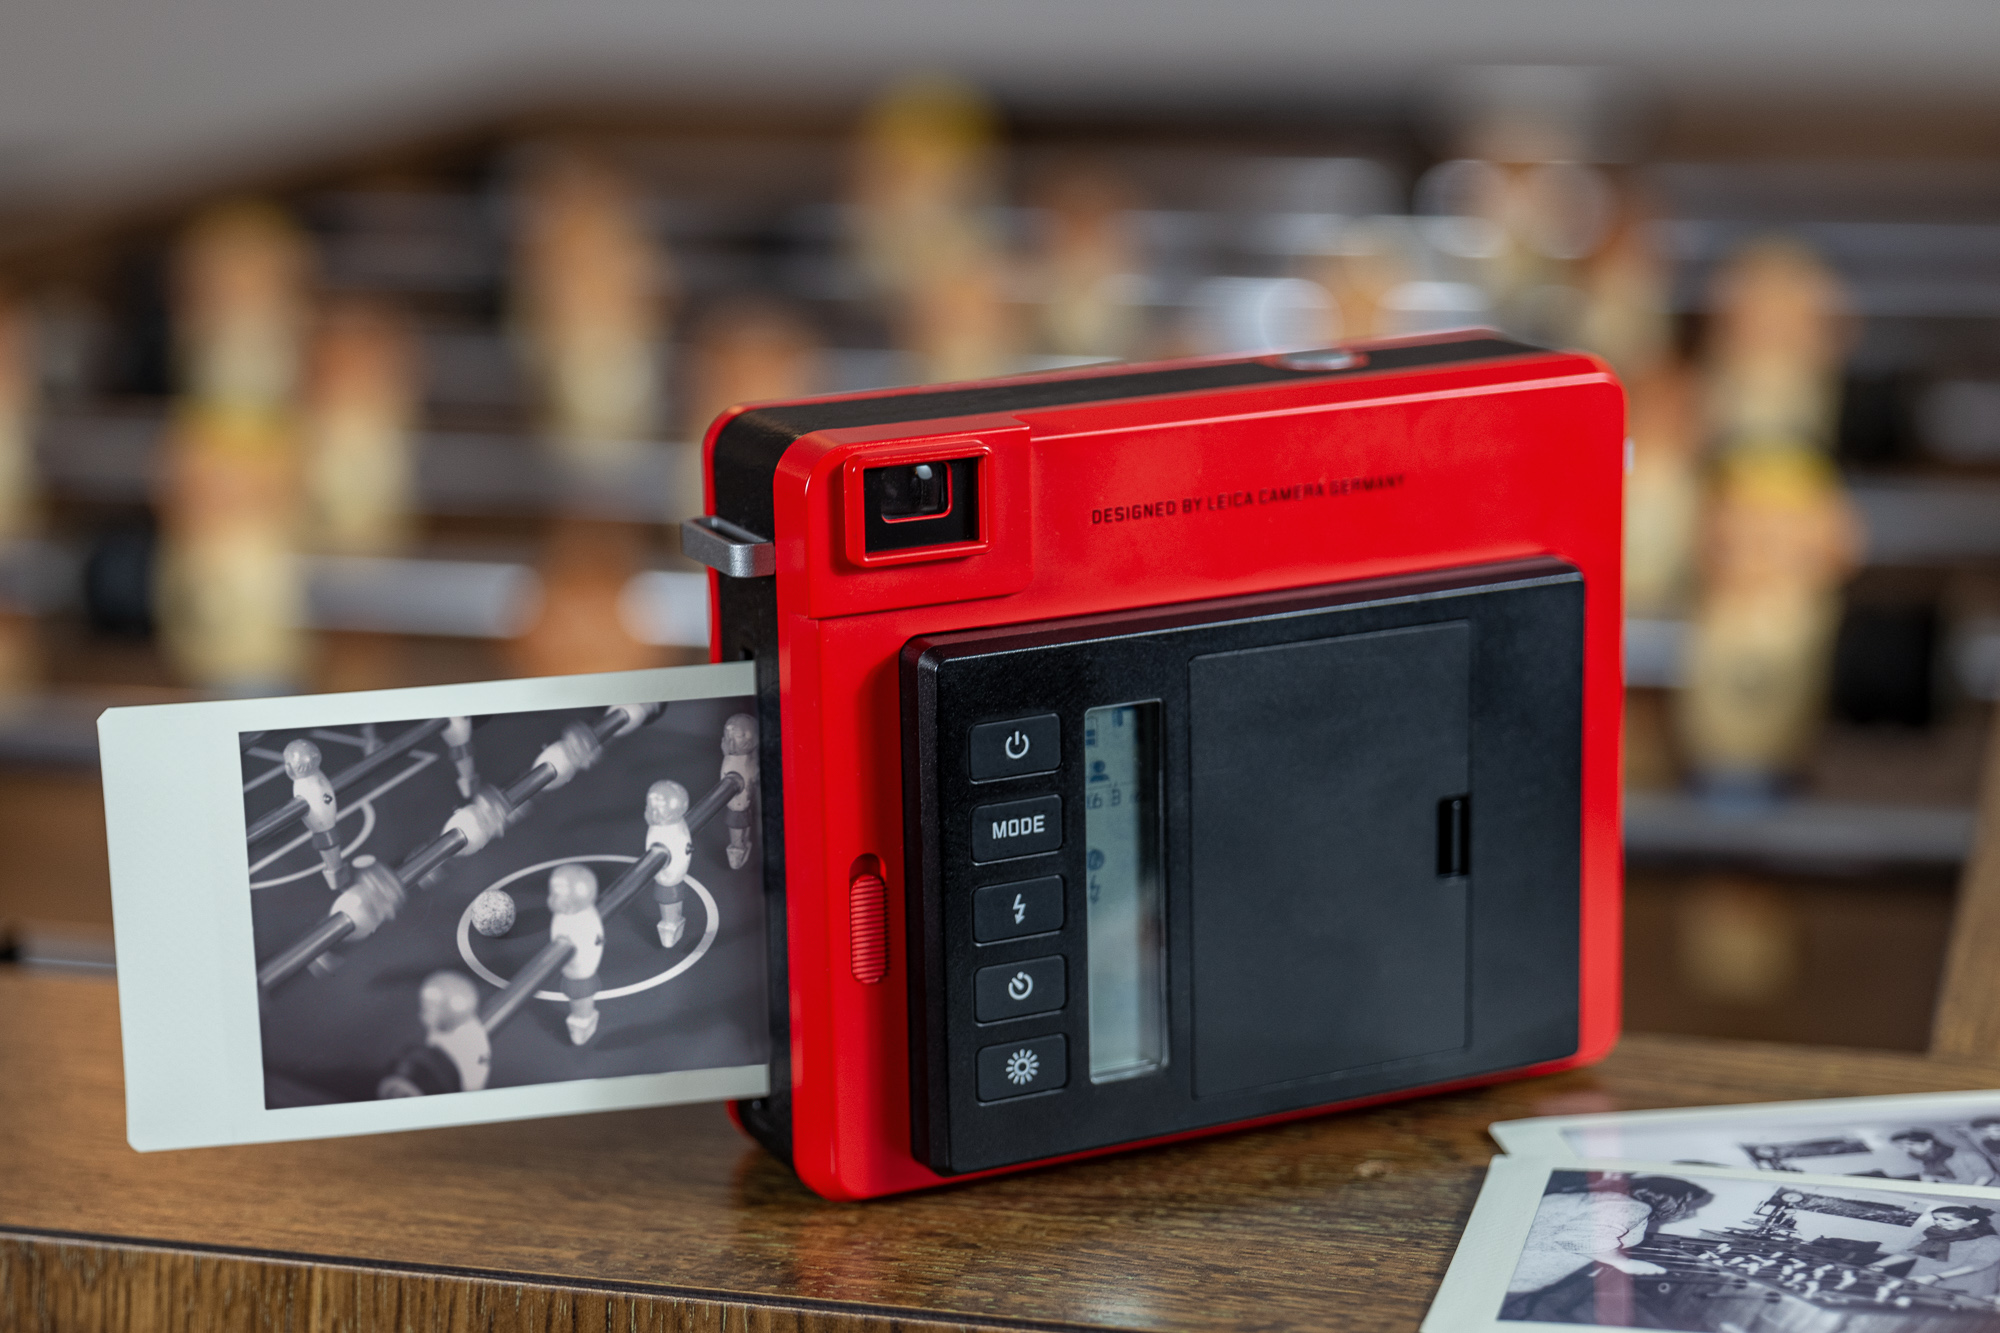 Leica Sofort Instant Film Camera in New Red Finish | Red Dot Forum